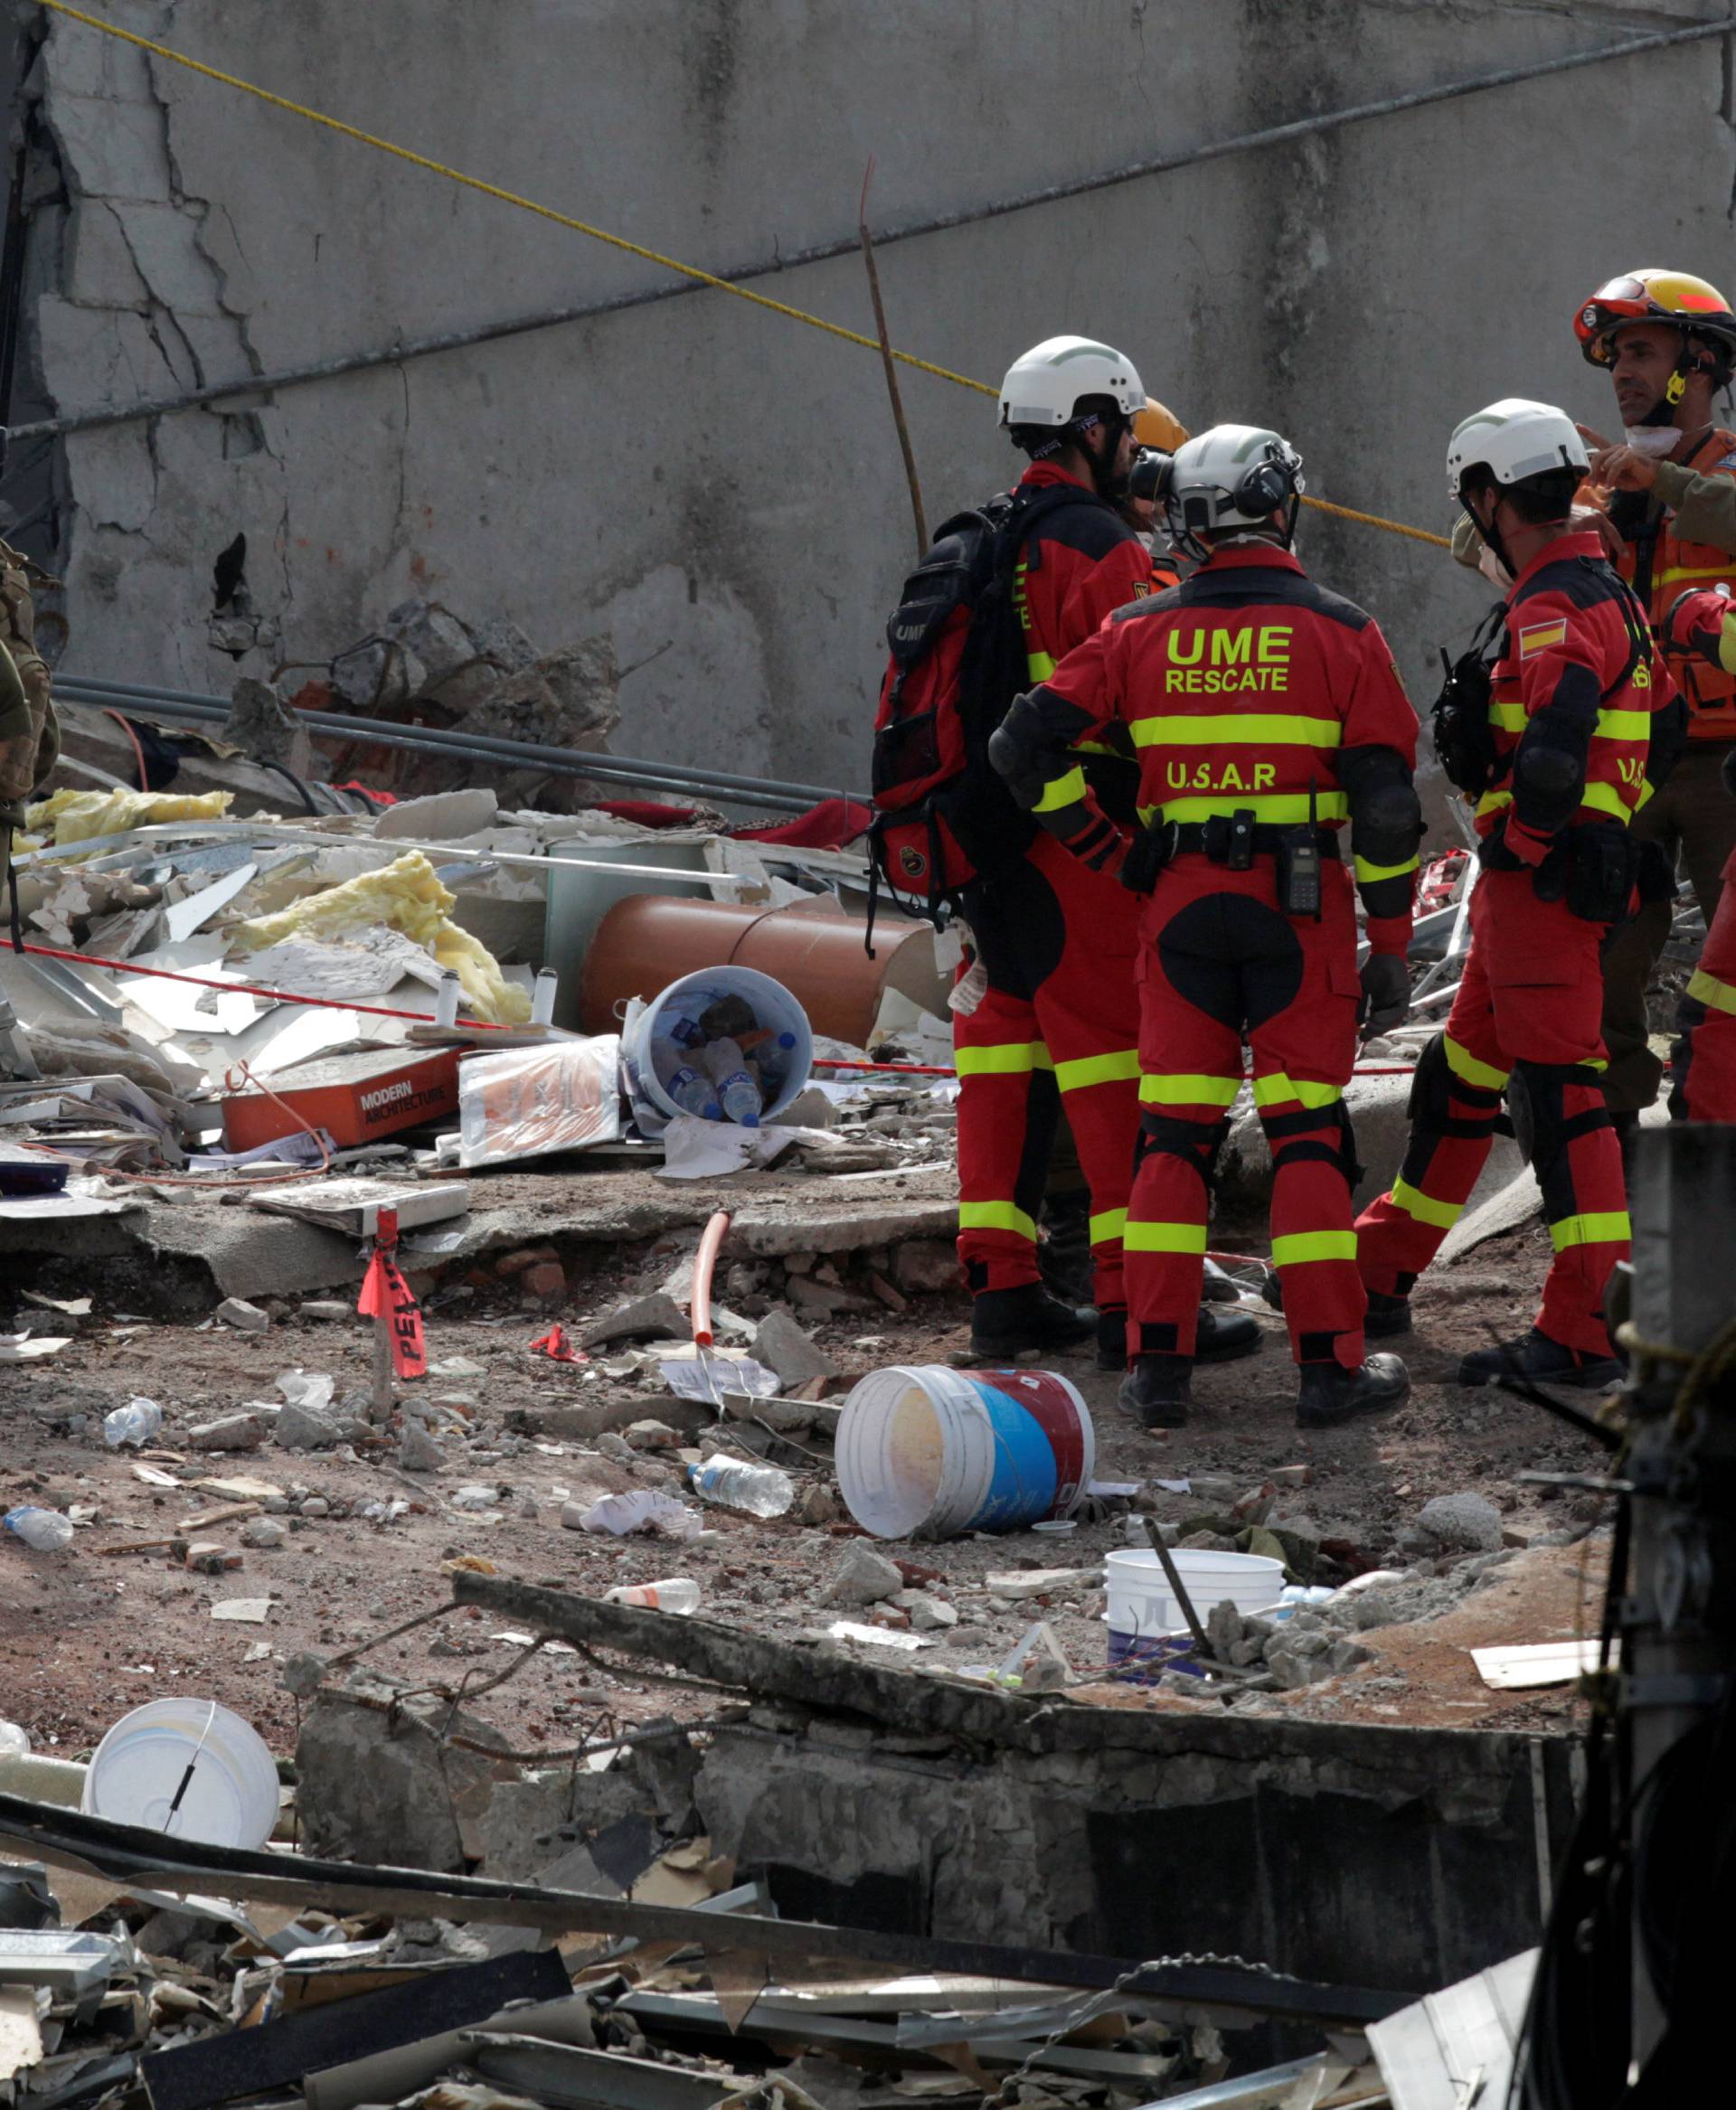 Members of Israeli and Spanish rescue teams talk while standing on the rubble of a collapsed building, after an earthquake, in Mexico City